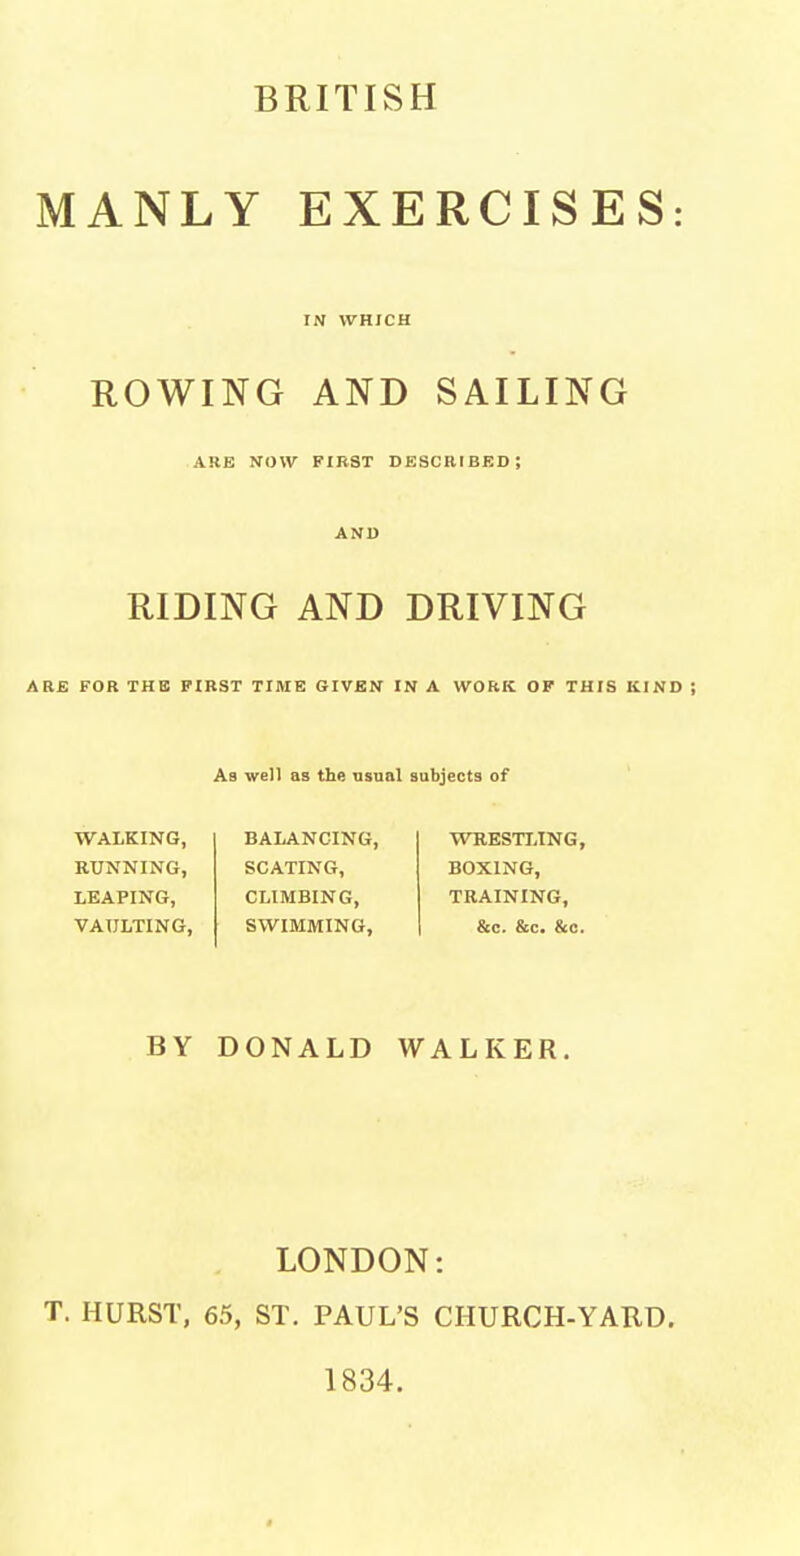 MANLY EXERCISES: IN WHICH ROWING AND SAILING ARB NOW FIRST DESCRIBED; RIDING AND DRIVING ARE FOR THE FIRST TIME GIVEN IN A WORK OF THIS KIND ; Ab well as the usual subjects of WALKING, RUNNING, LEAPING, VAULTING, BALANCING, SCATING, CLIMBING, SWIMMING, WRESTLING, BOXING, TRAINING, &c. &c. &c. BY DONALD WALKER, LONDON: T. HURST, 65, ST. PAUL'S CHURCH-YARD. 1834.